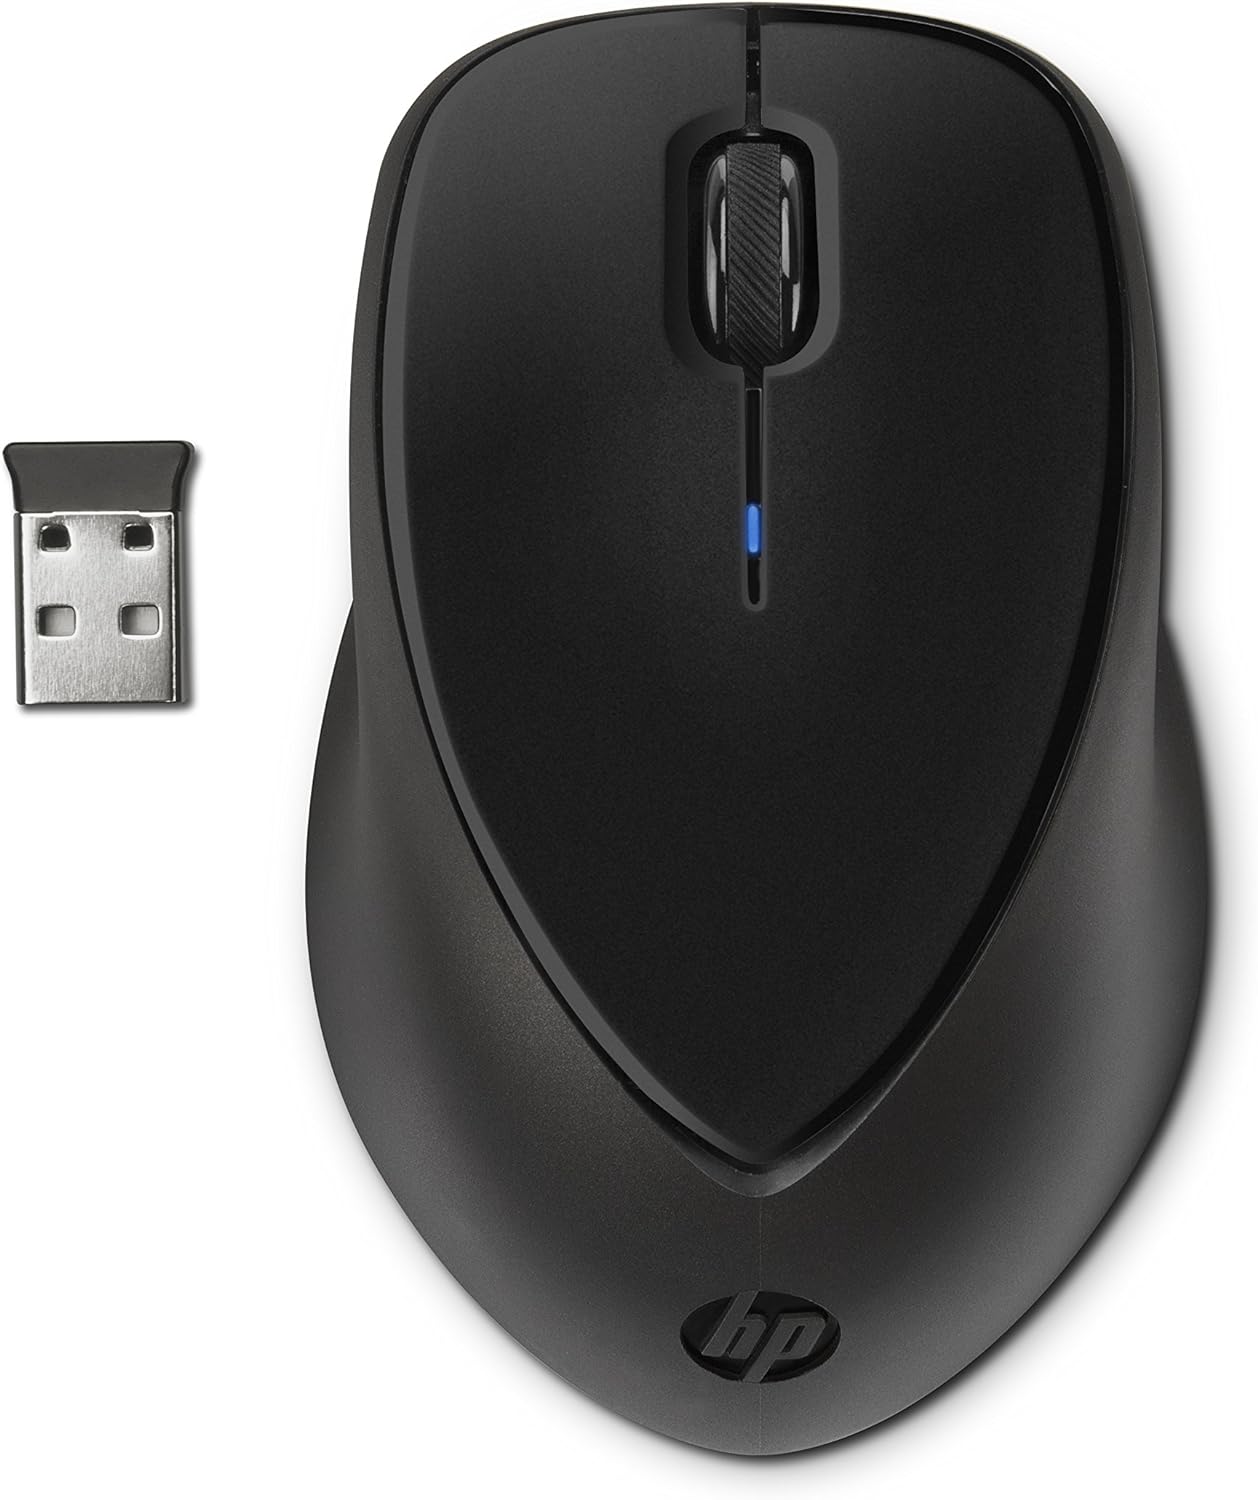 HP wireless mouse and HP PC troubleshooting steps.